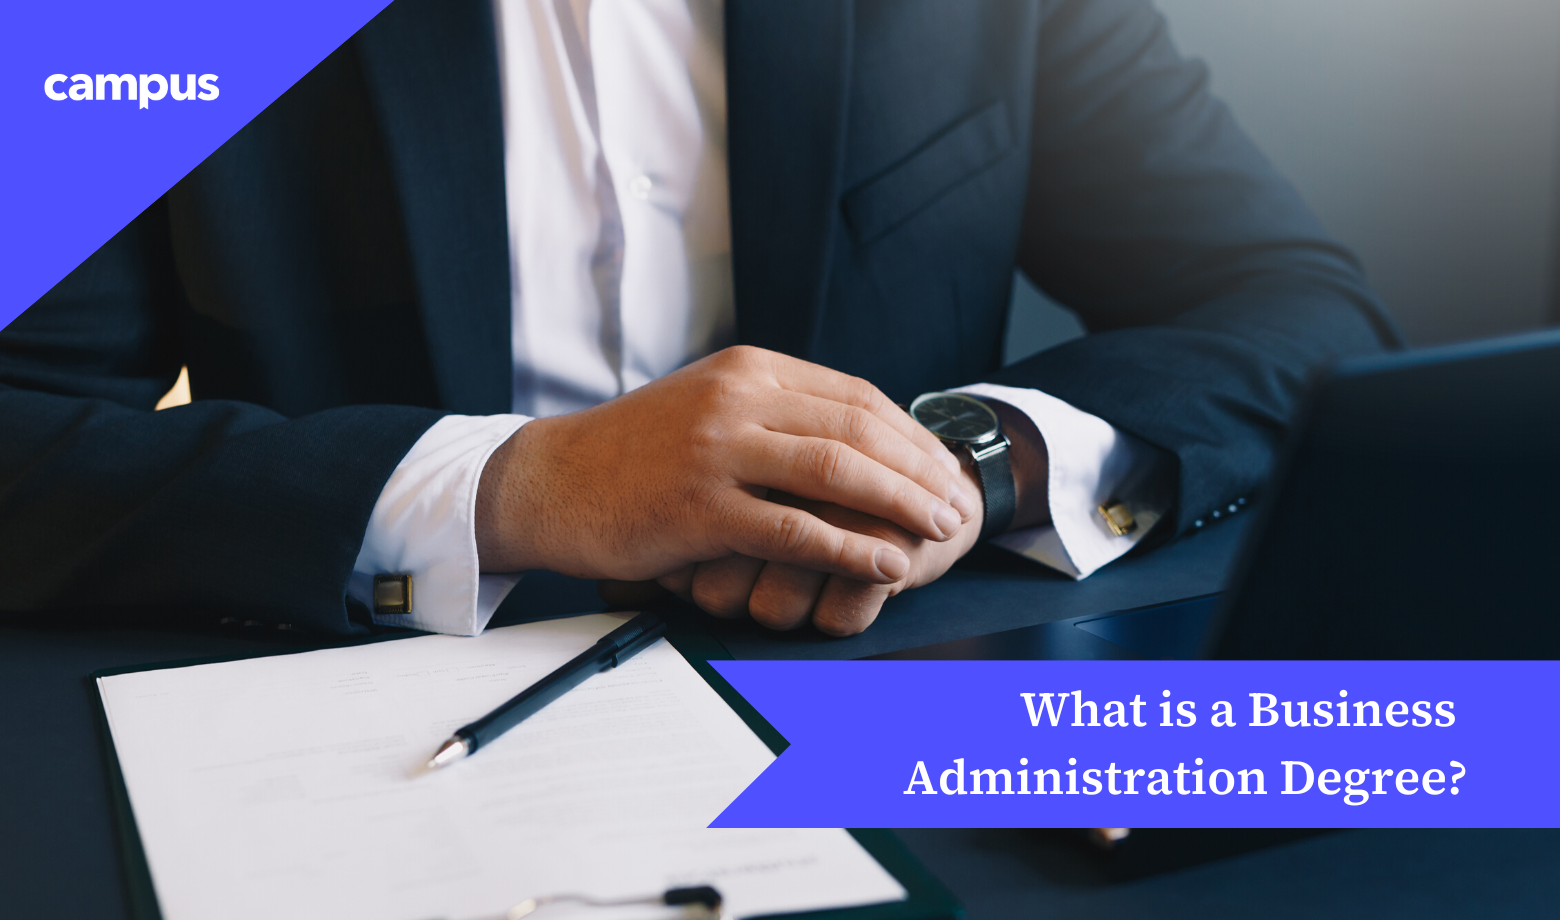 What is a Business Administration Degree?